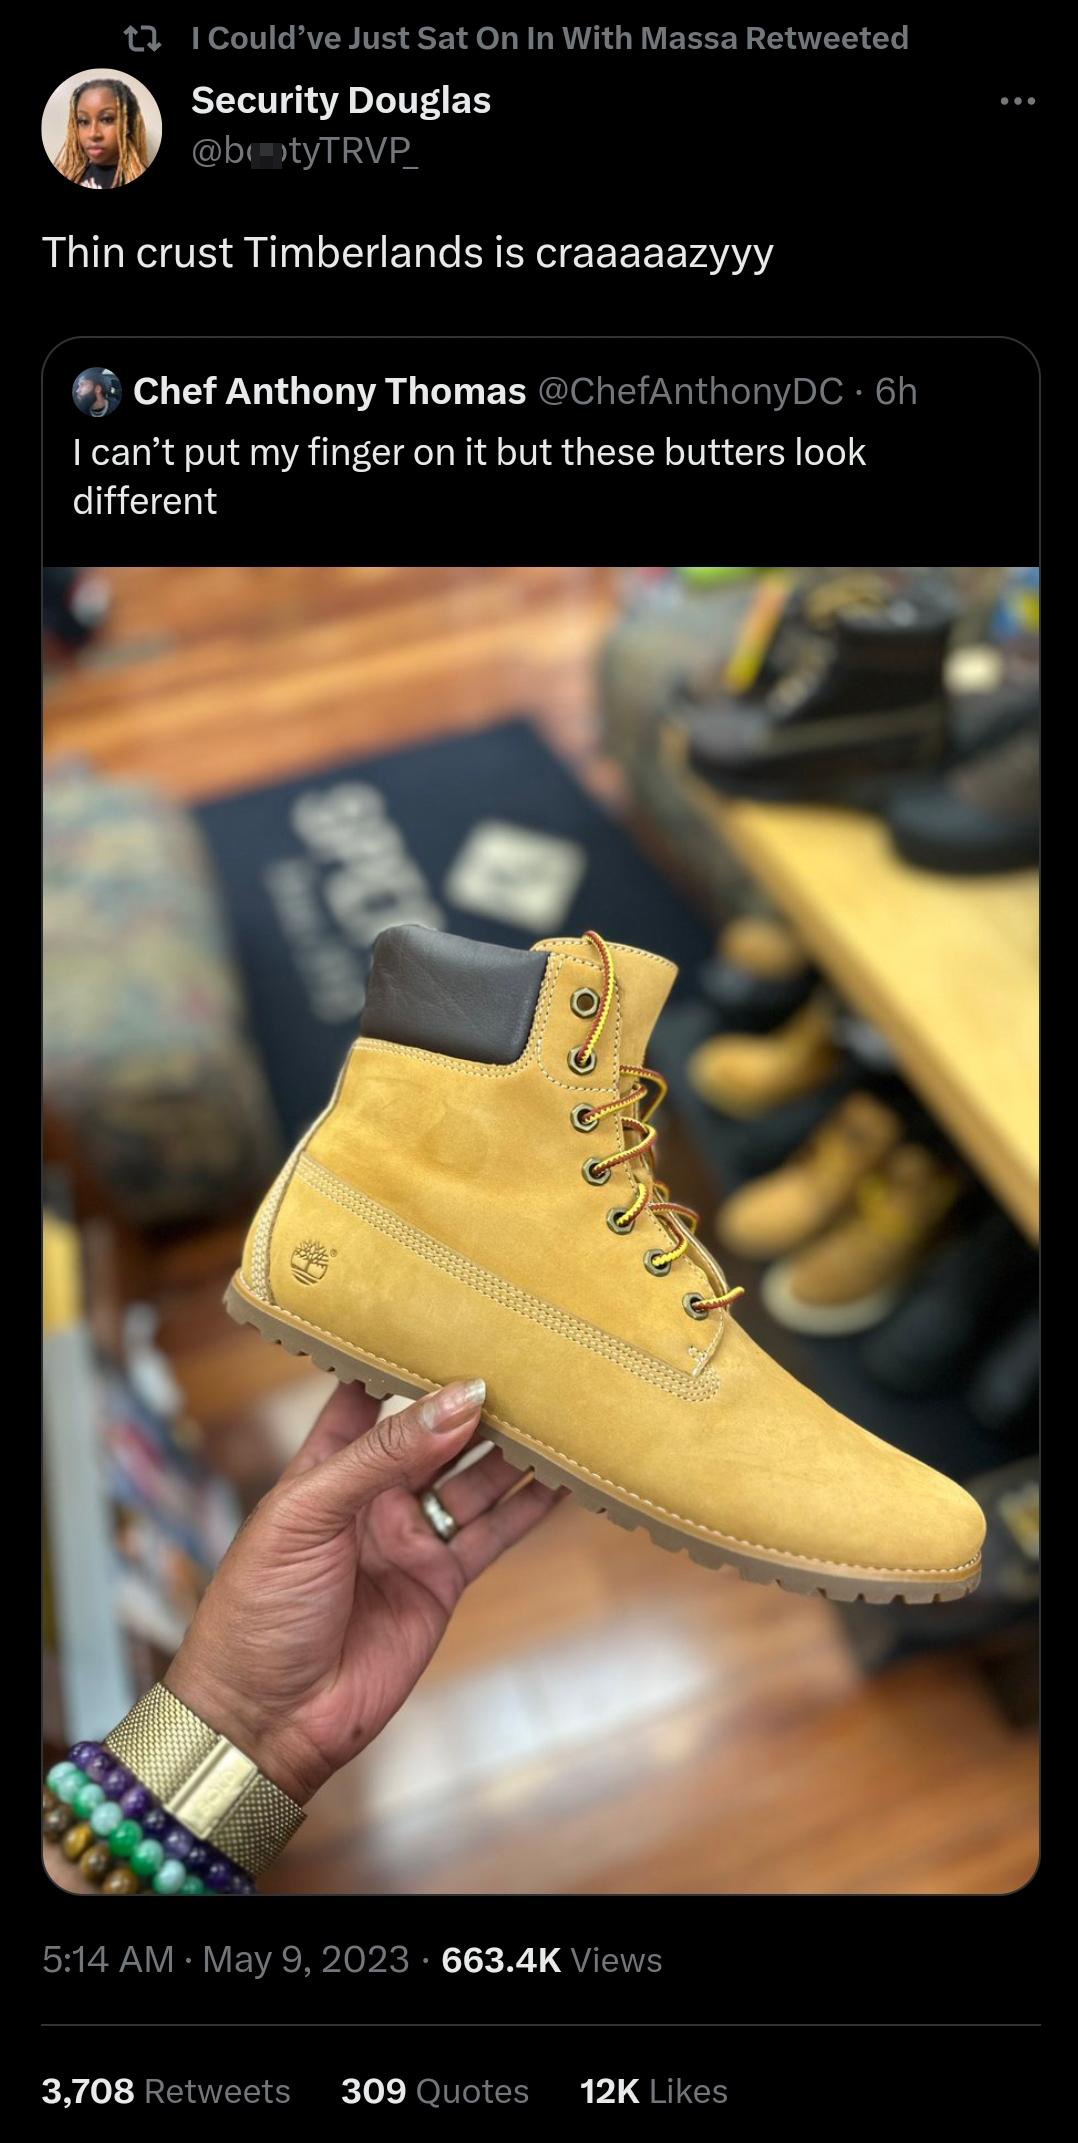 funny tweets and memes - outdoor shoe - 1 I Could've Just Sat On In With Massa Retweeted Security Douglas Thin crust Timberlands is craaaaazyyy Chef Anthony Thomas Dc6h I can't put my finger on it but these butters look different N Views 3,708 309 Quotes 